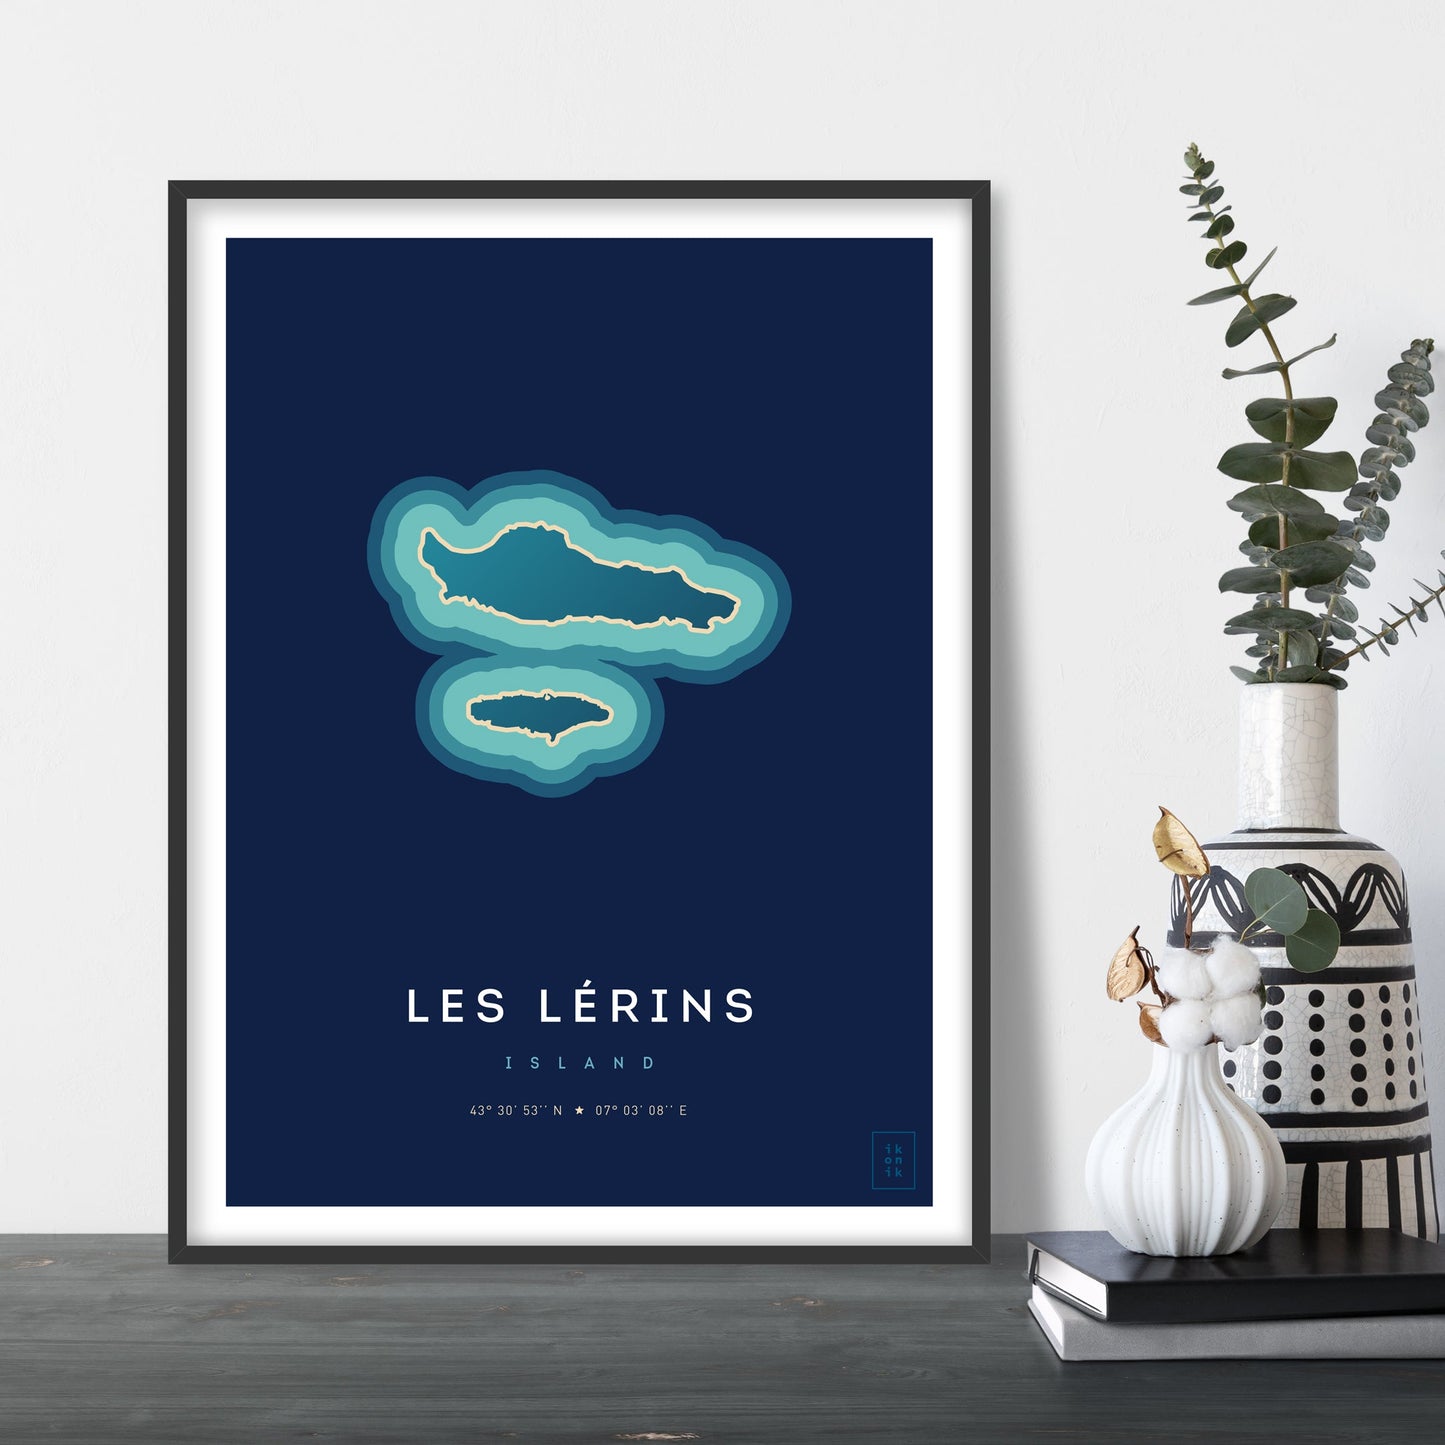 Poster of the Lérins Islands